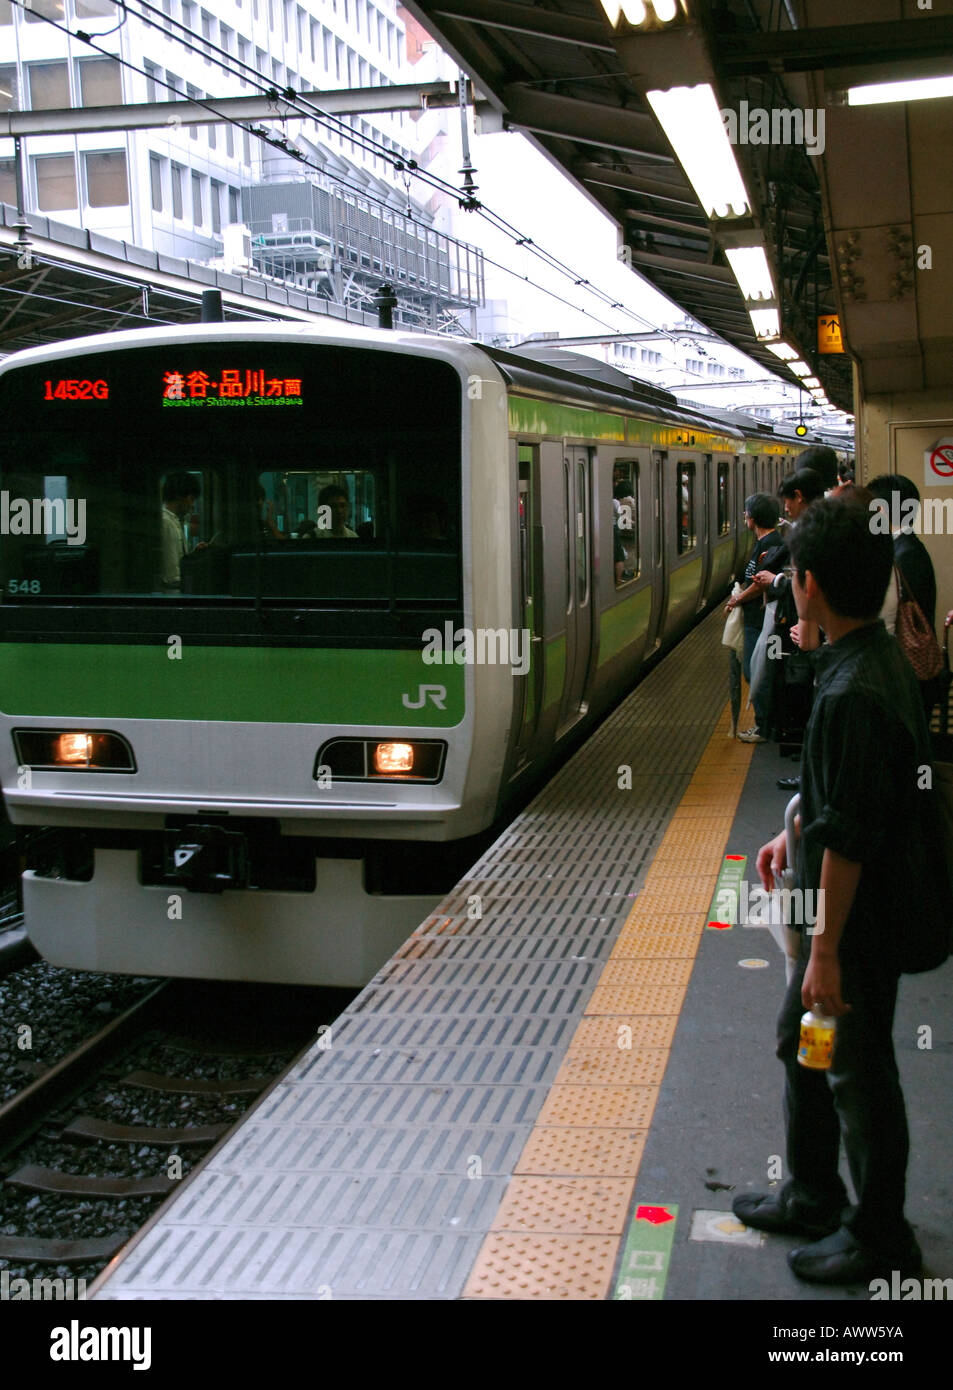 People waiting for the train, passengers on the JR Yamanote Line subway system, Tokyo Japan Stock Photo